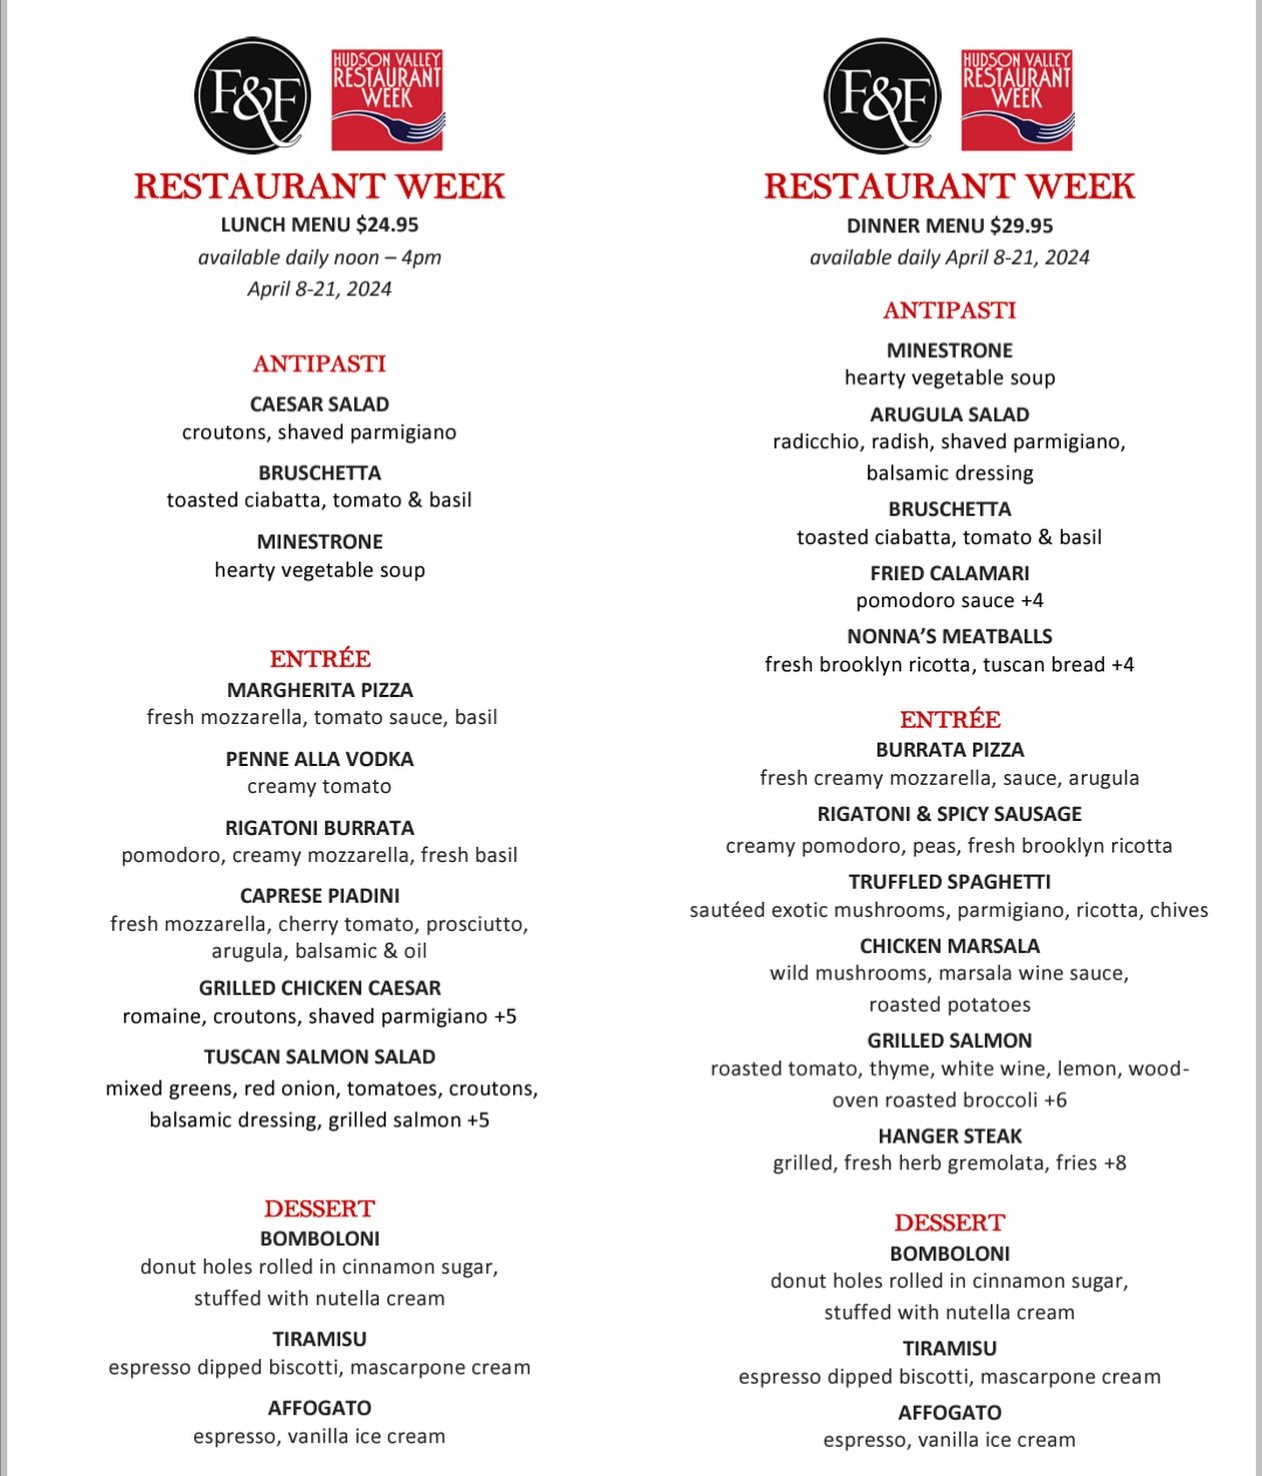 Join us today! 

Hudson Valley Restaurant Week has started! 

We&rsquo;re delighted to invite you for a 3-course prix fixe meal dinner menu starting at $24.95 Lunch &amp; $29.95 for dinner.

SPRING HVRW
April 8th - 21st, 2024
3-course tasting menu

#